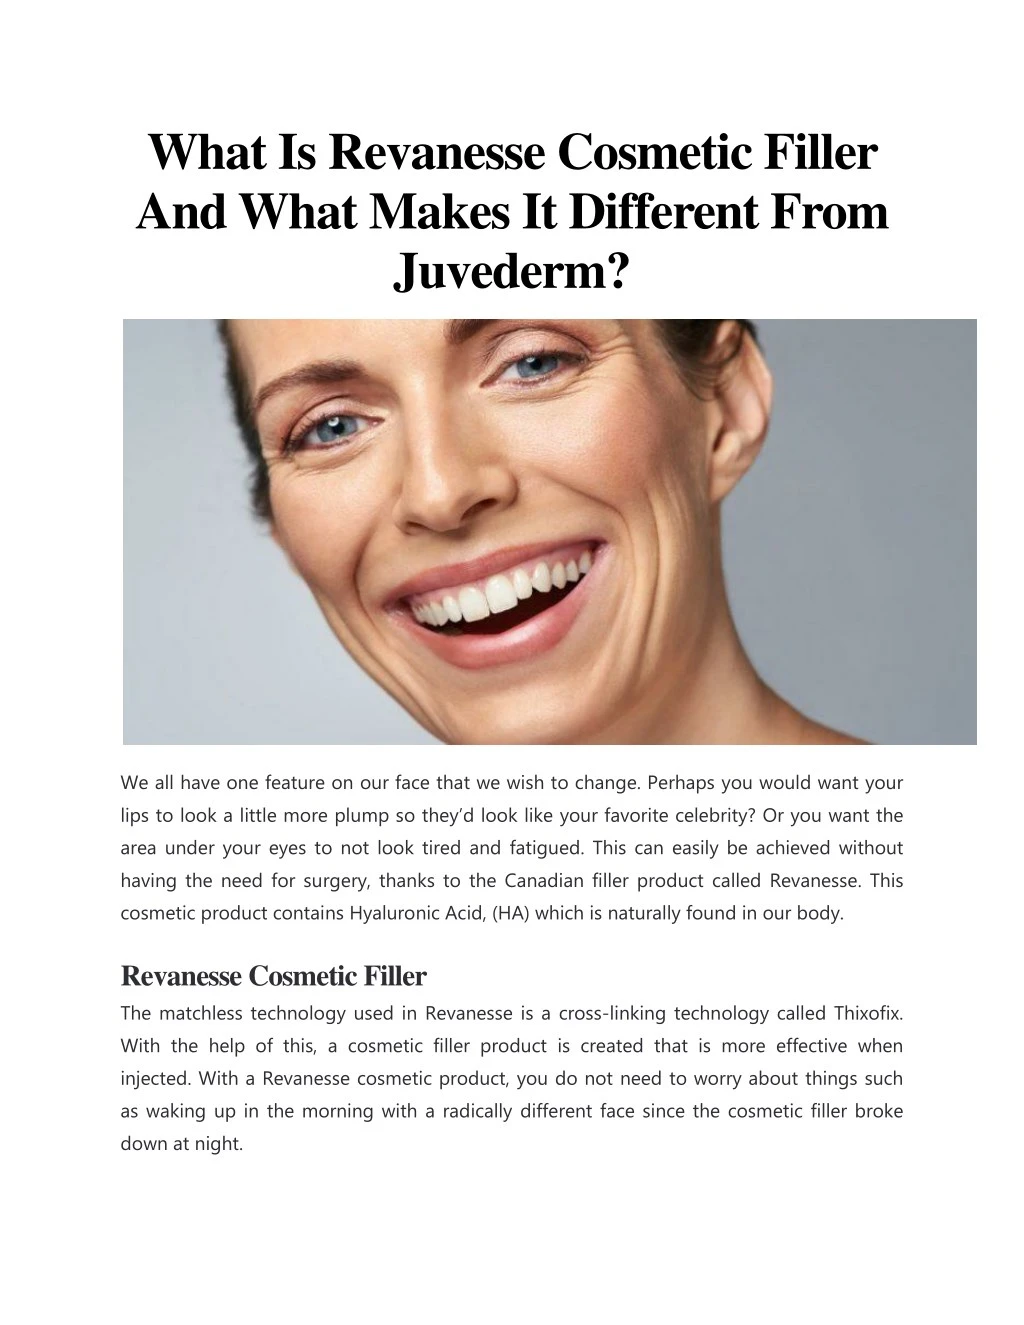 what is revanesse cosmetic filler and what makes